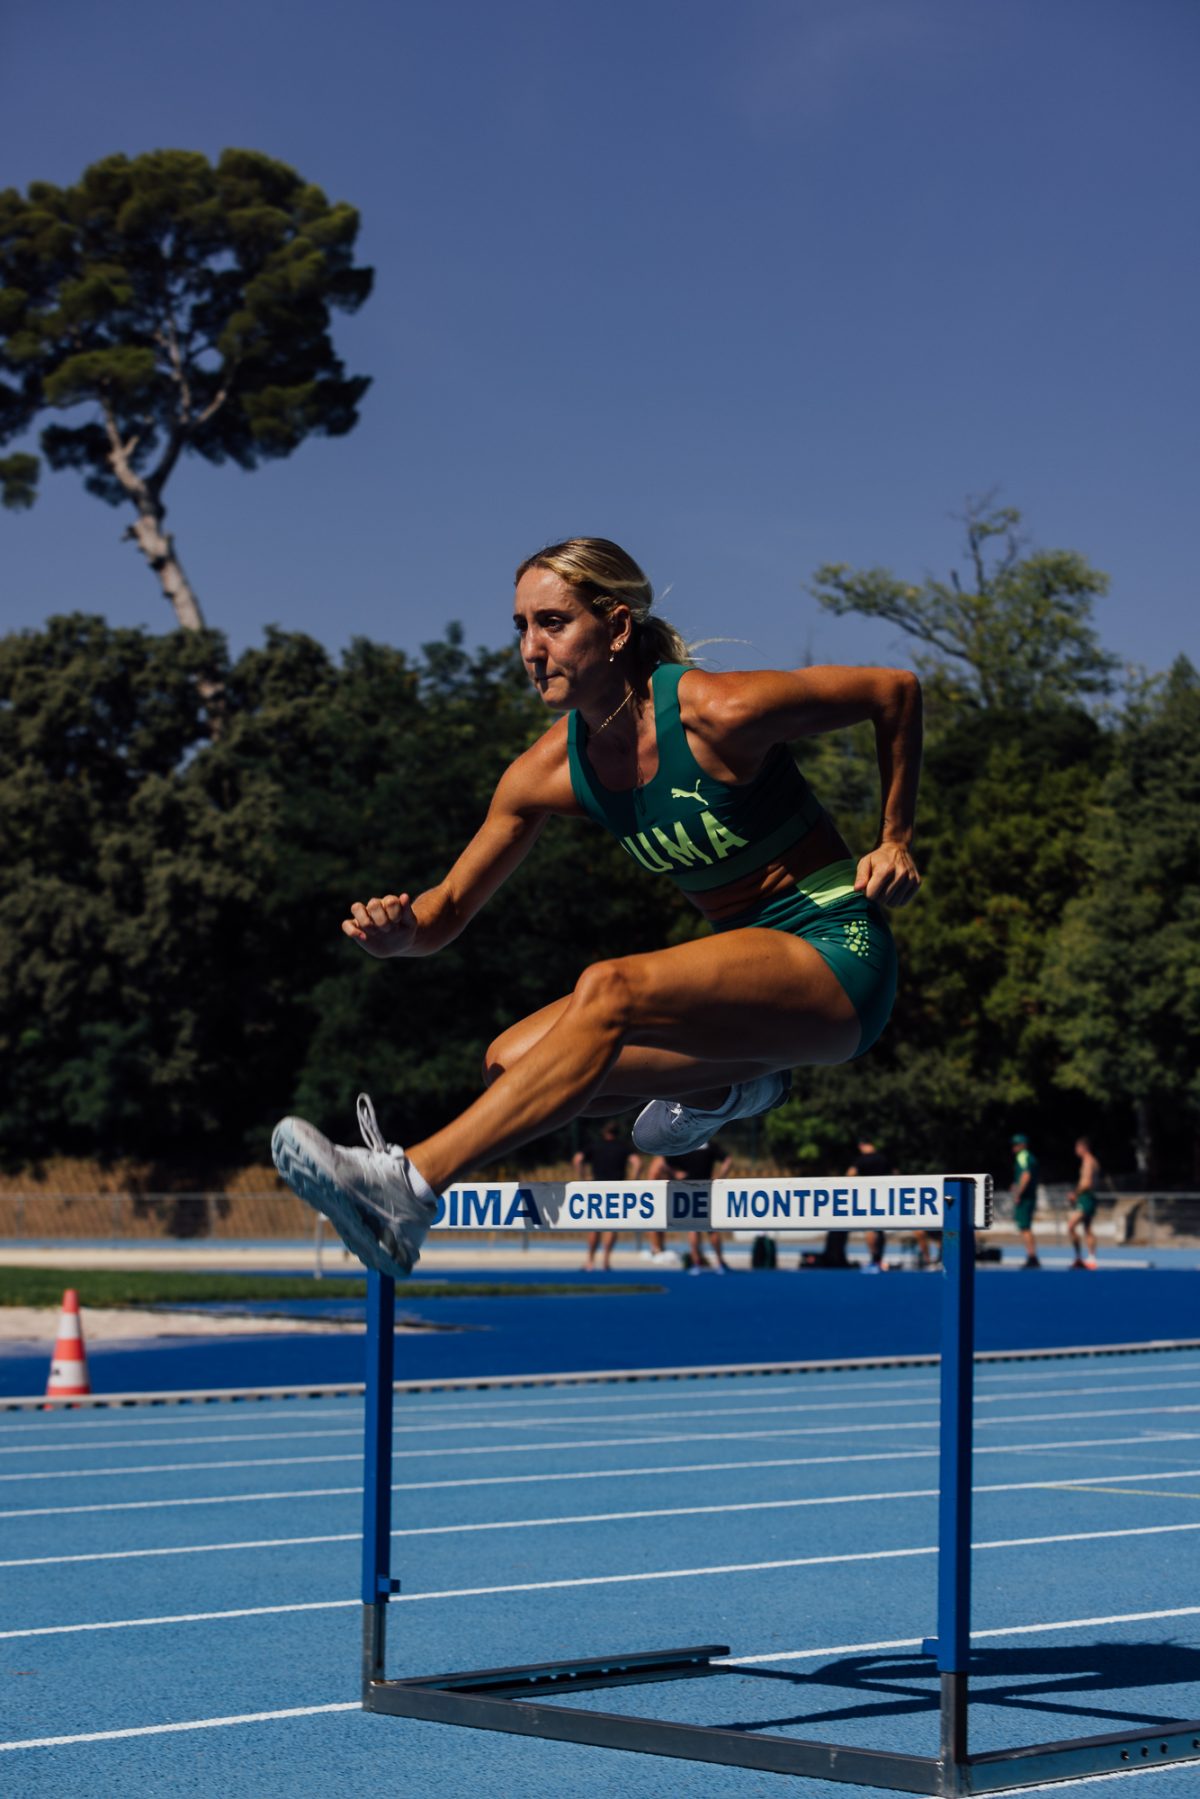 Sarah Carli competes in the women's hurdles at the world cup.